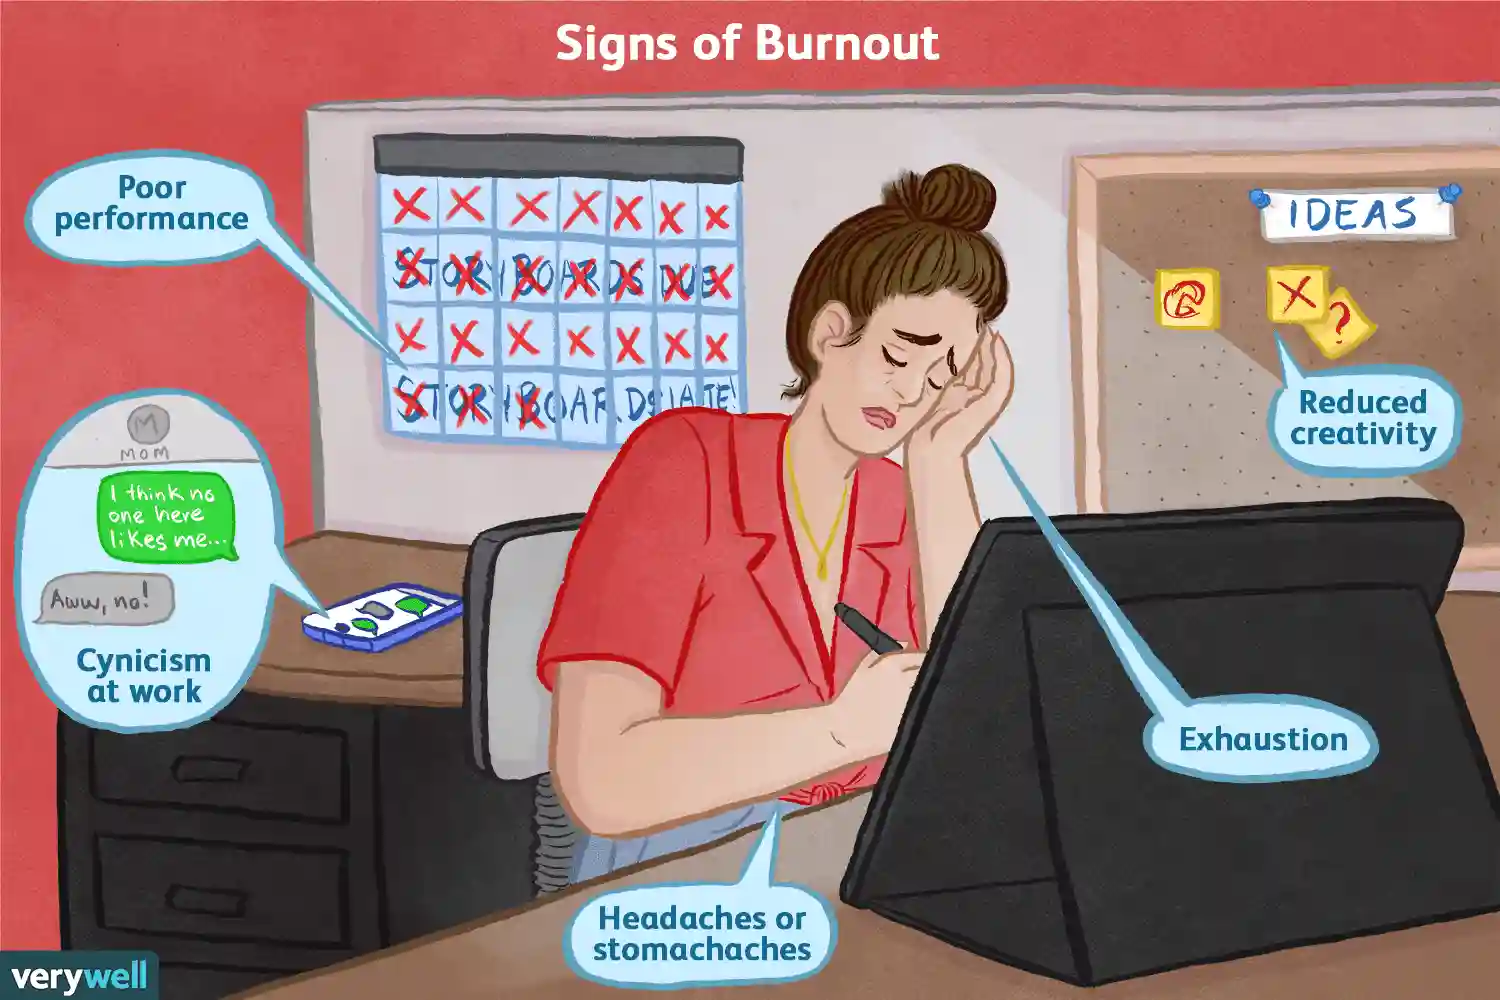 Workplace Burnout: Causes, Effects, and Tips on Avoiding It